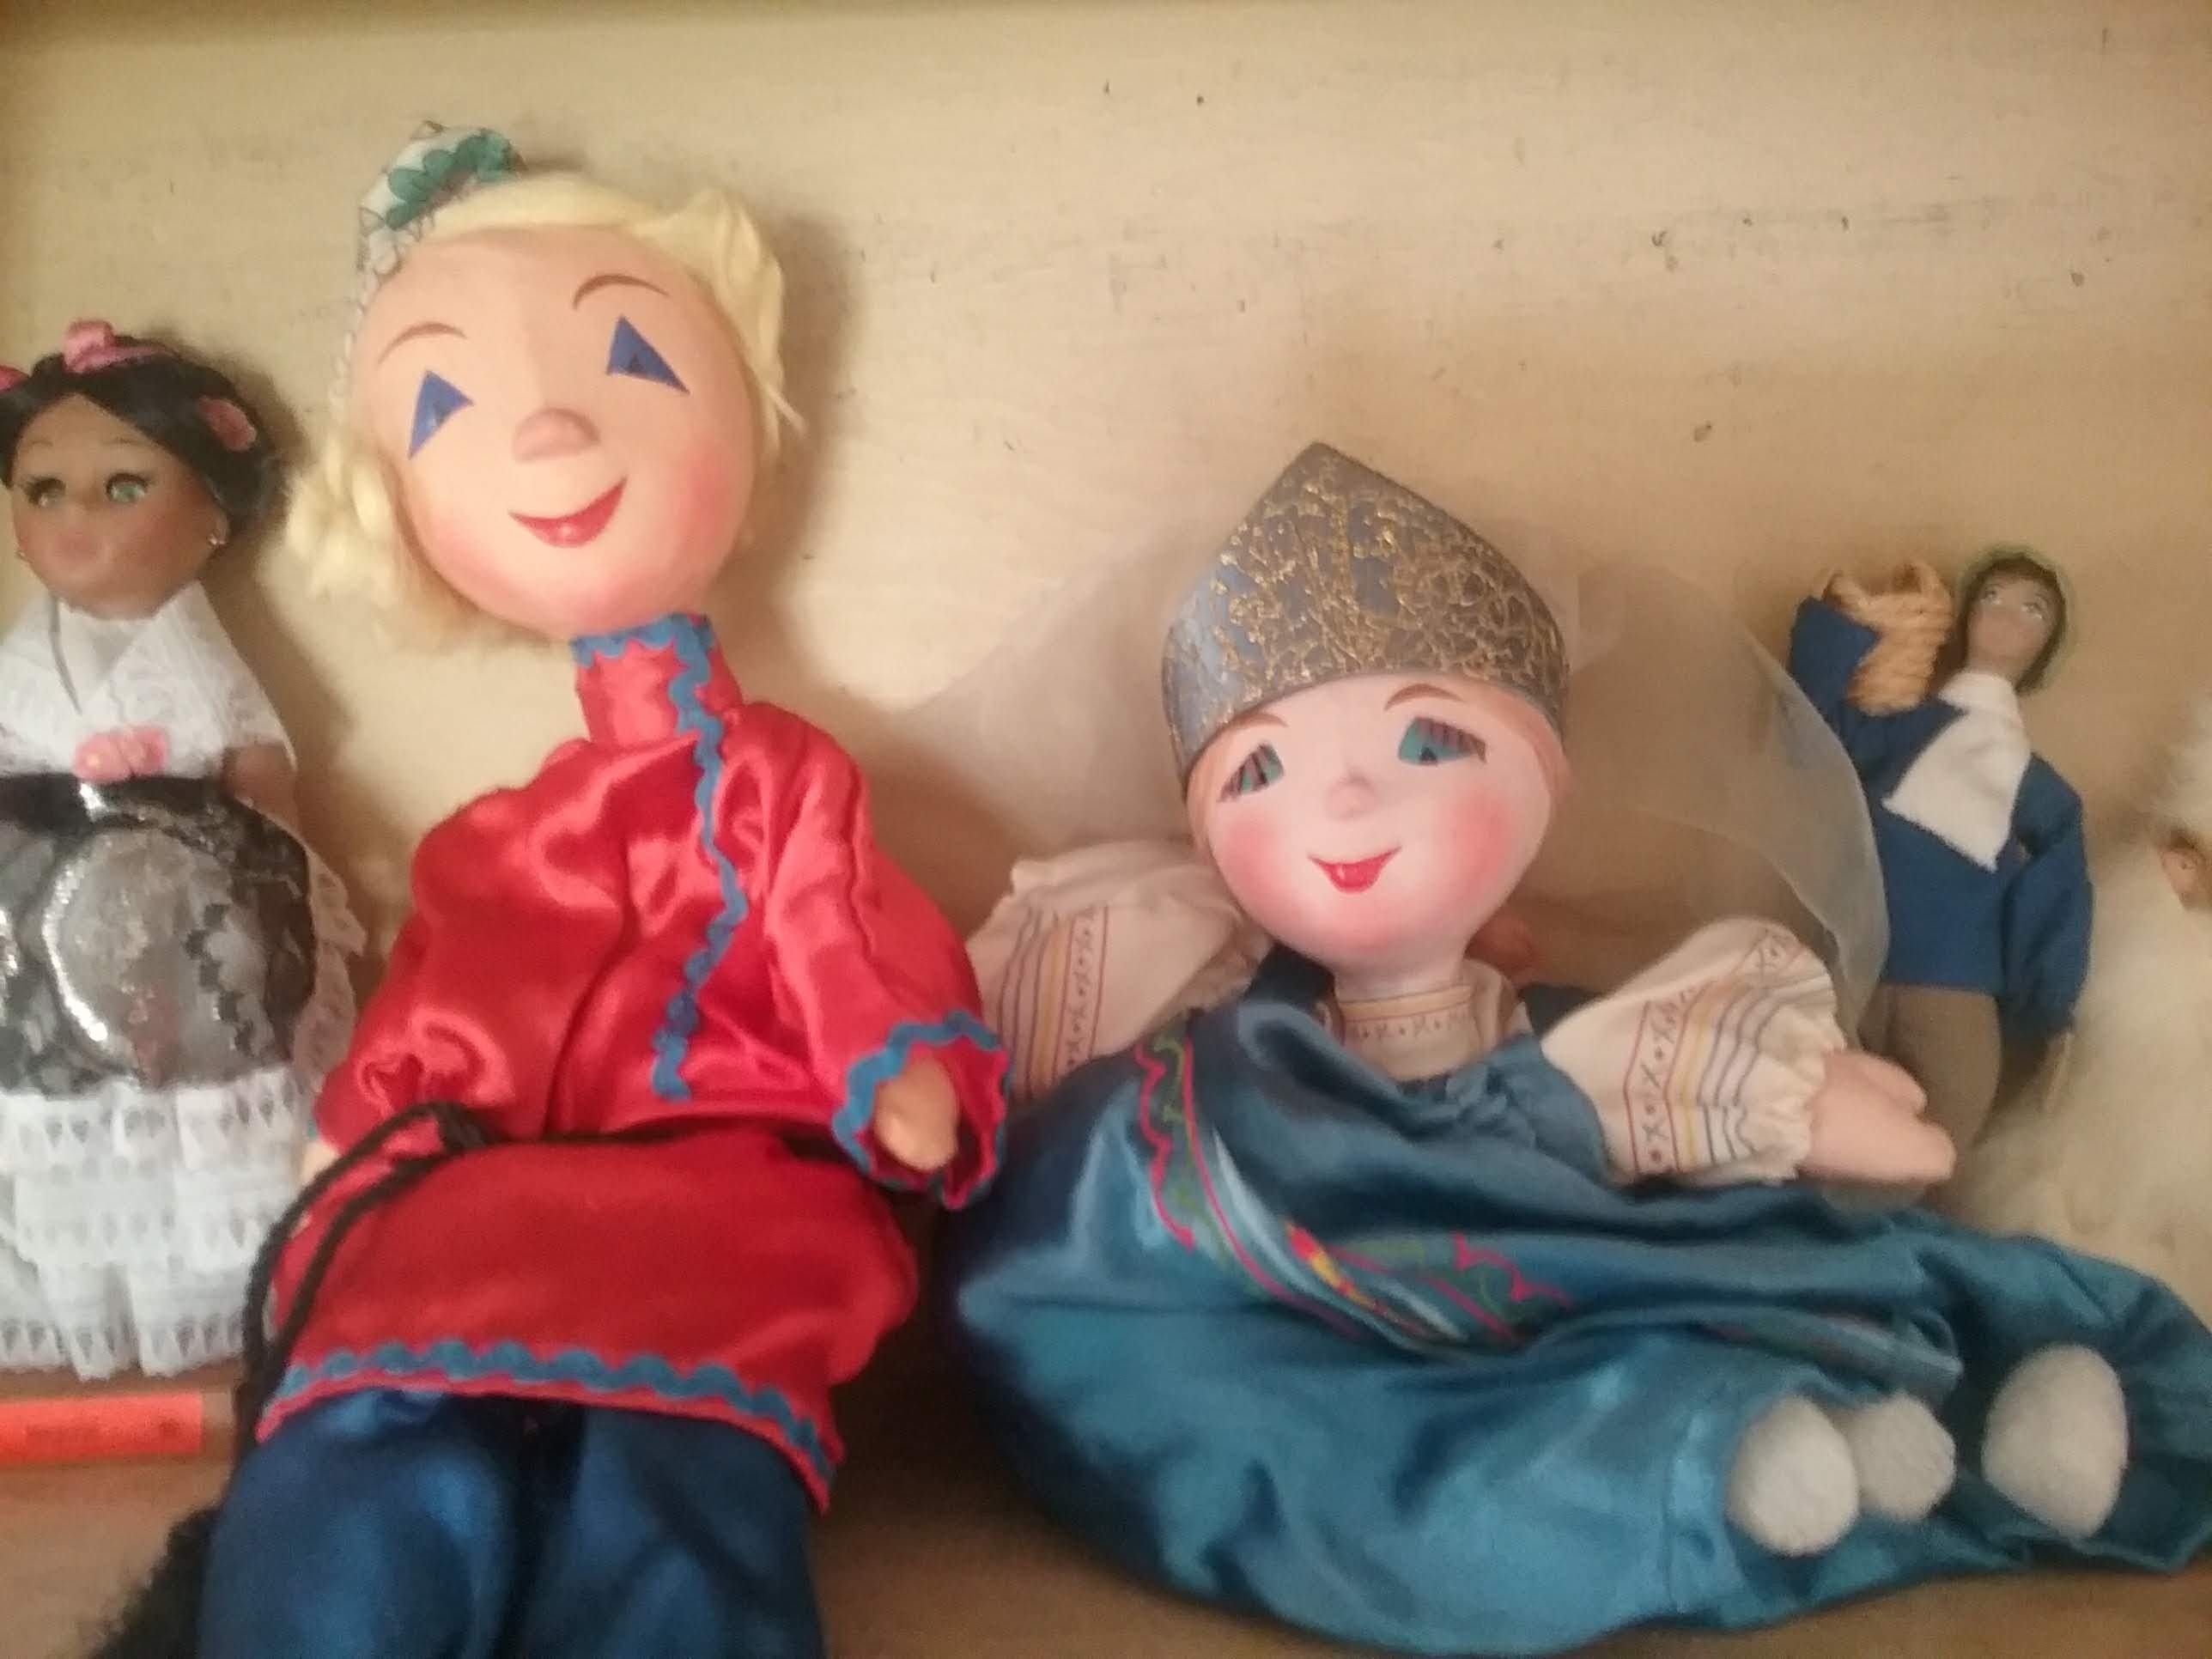 Some of the storytelling dolls that Pam Miller has collected in the Storytelling Resource Place